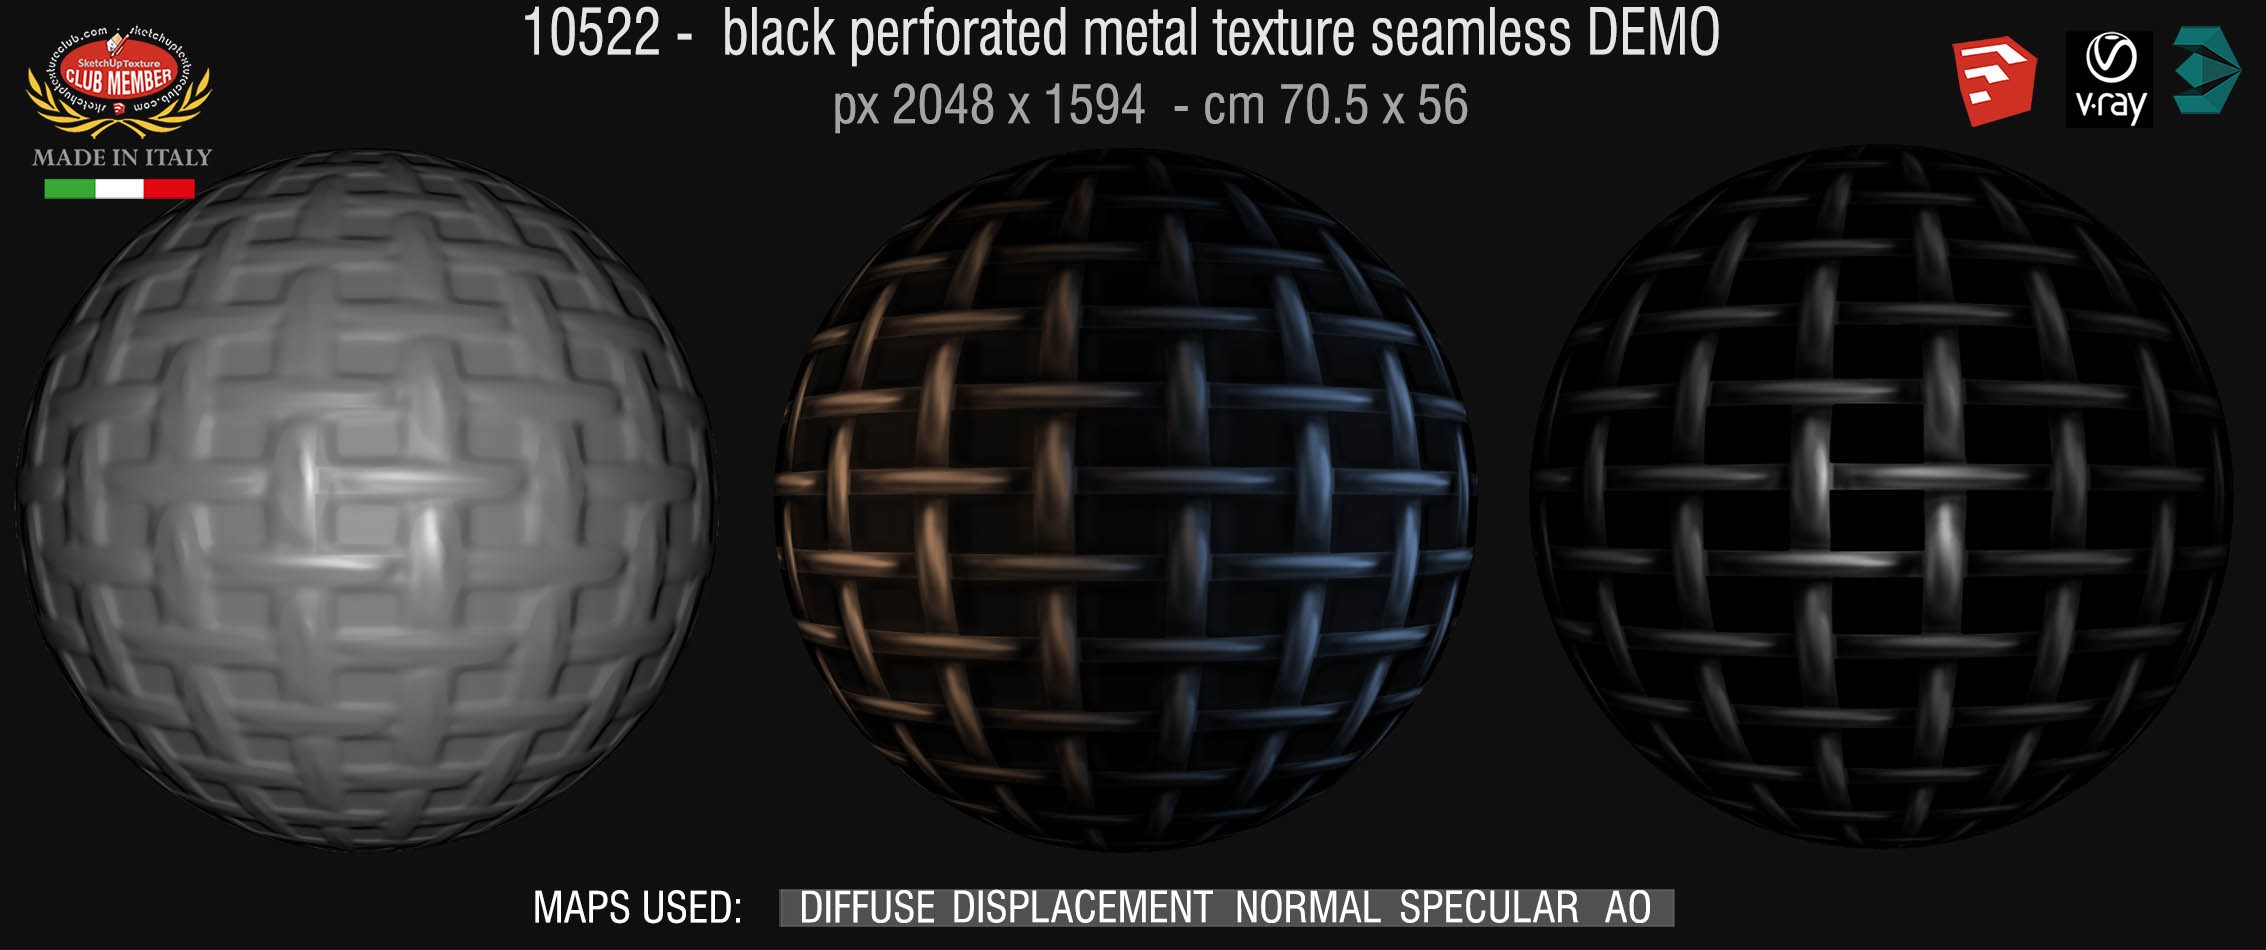 10522 HR Black perforated metal texture seamless + maps DEMO